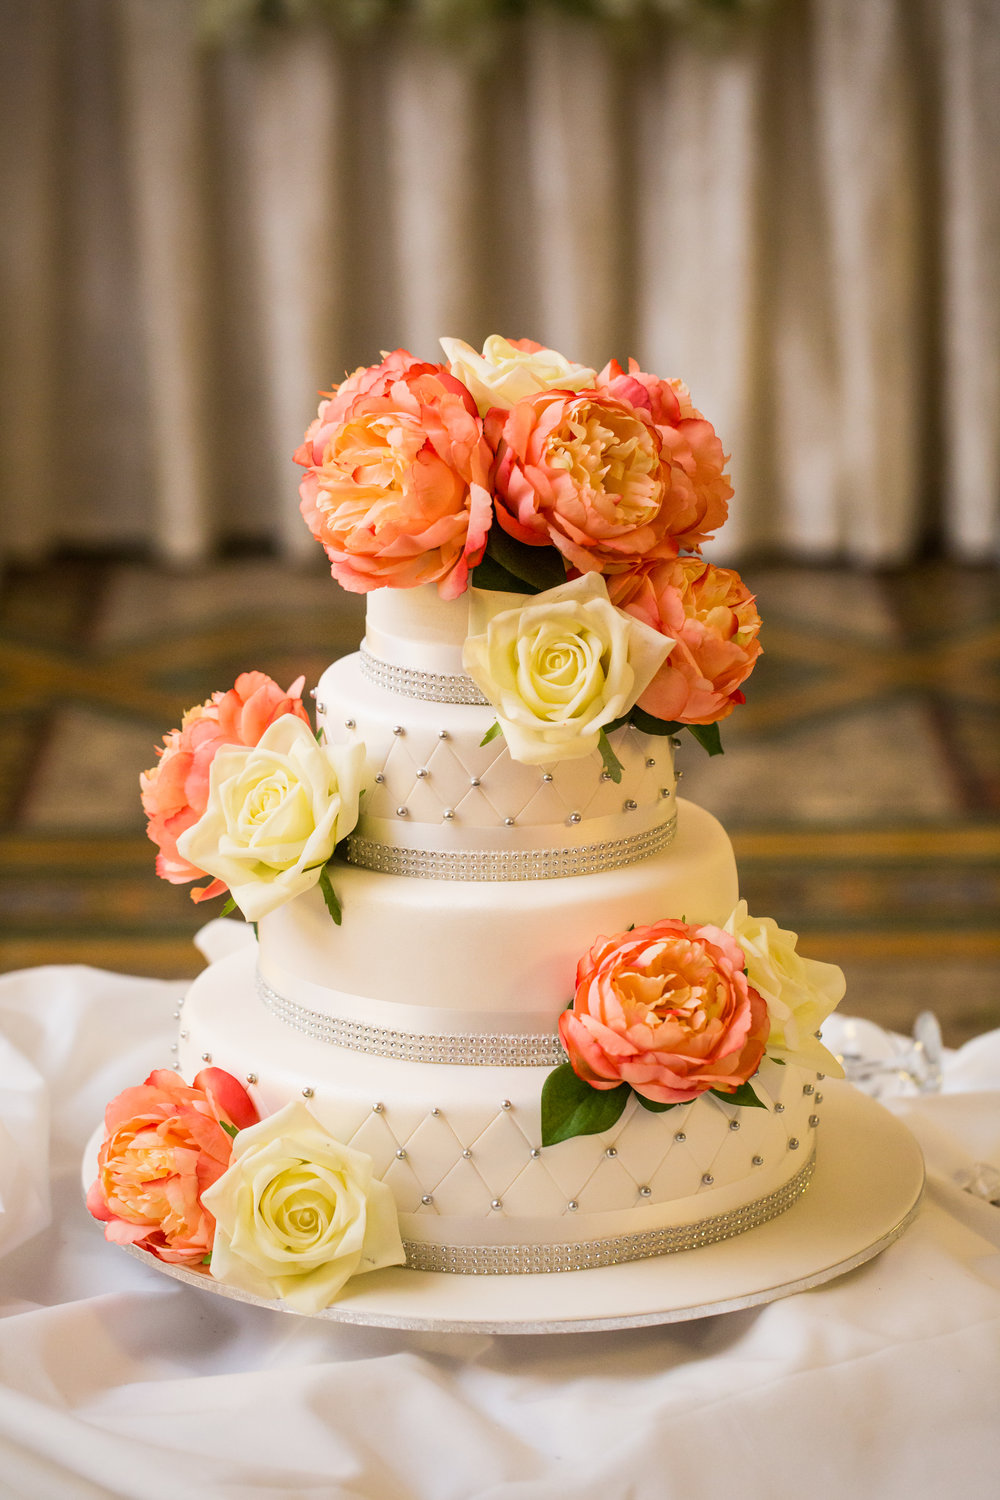 Peach and White Wedding Cake - A Curzon Hall Wedding - T-One Photography